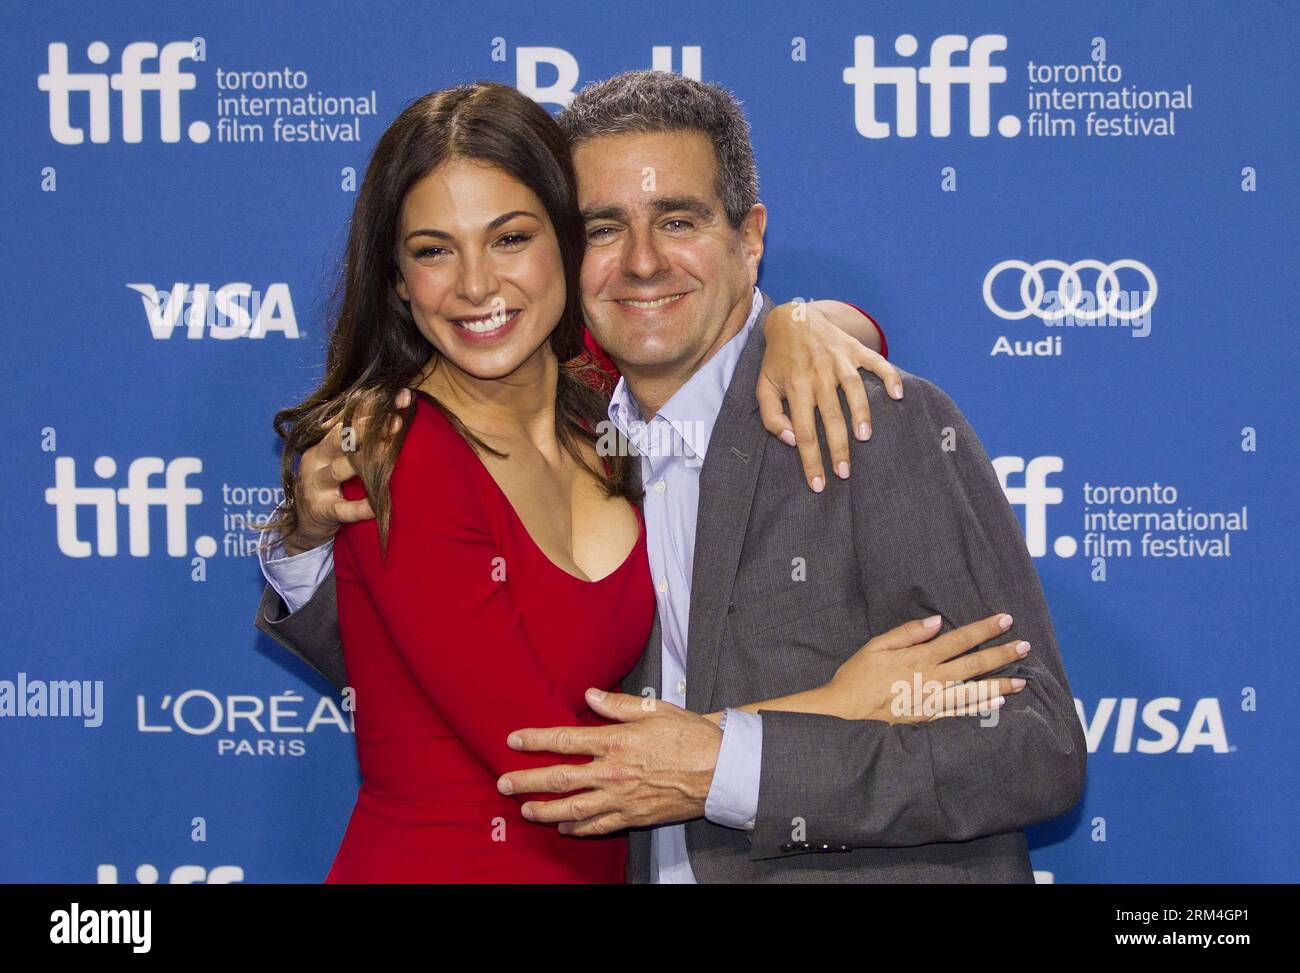 Bildnummer: 60459220  Datum: 10.09.2013  Copyright: imago/Xinhua (130911) -- TORONTO, (Xinhua) -- Actress Moran Atias (L) and producer Michael Nozik attend the press conference of the film The Third Person during the 38th Toronto International Film Festival in Toronto, Canada, Sept. 10, 2013. (Xinhua/Zou Zheng)(axy) CANADA-TORONTO-38TH INTERNATIONAL FILM FESTIVAL-FILM THE THIRD PERSON PUBLICATIONxNOTxINxCHN Entertainment People x0x xkg 2013 quer premiumd     60459220 Date 10 09 2013 Copyright Imago XINHUA  Toronto XINHUA actress Moran Atias l and Producer Michael  attend The Press Conference o Stock Photo